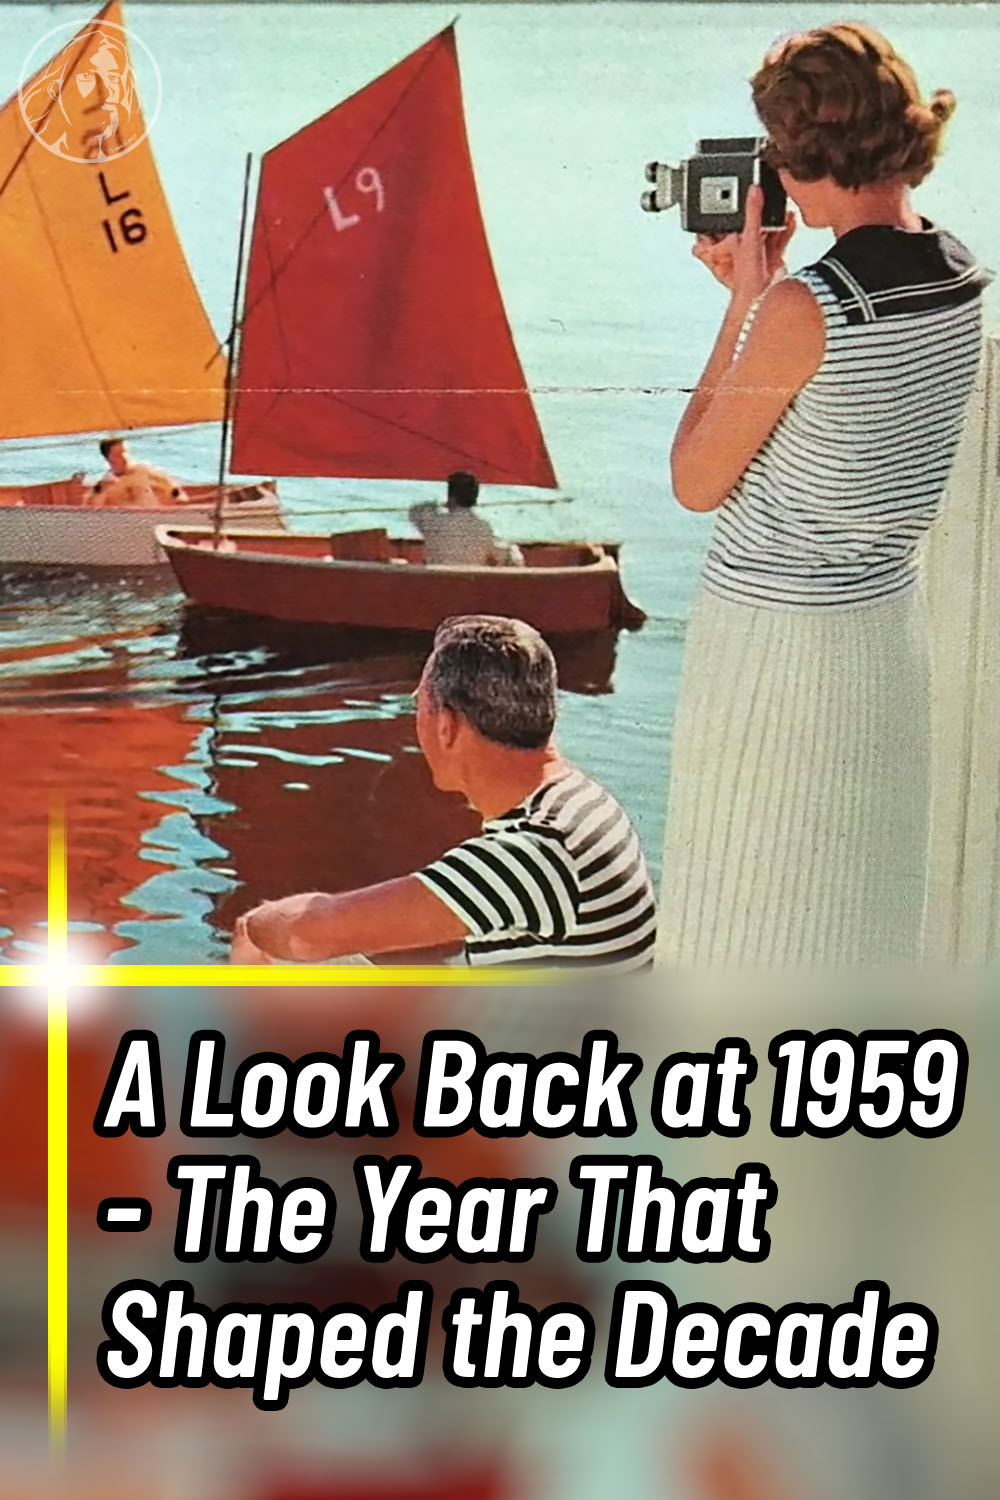 A Look Back at 1959 - The Year That Shaped the Decade